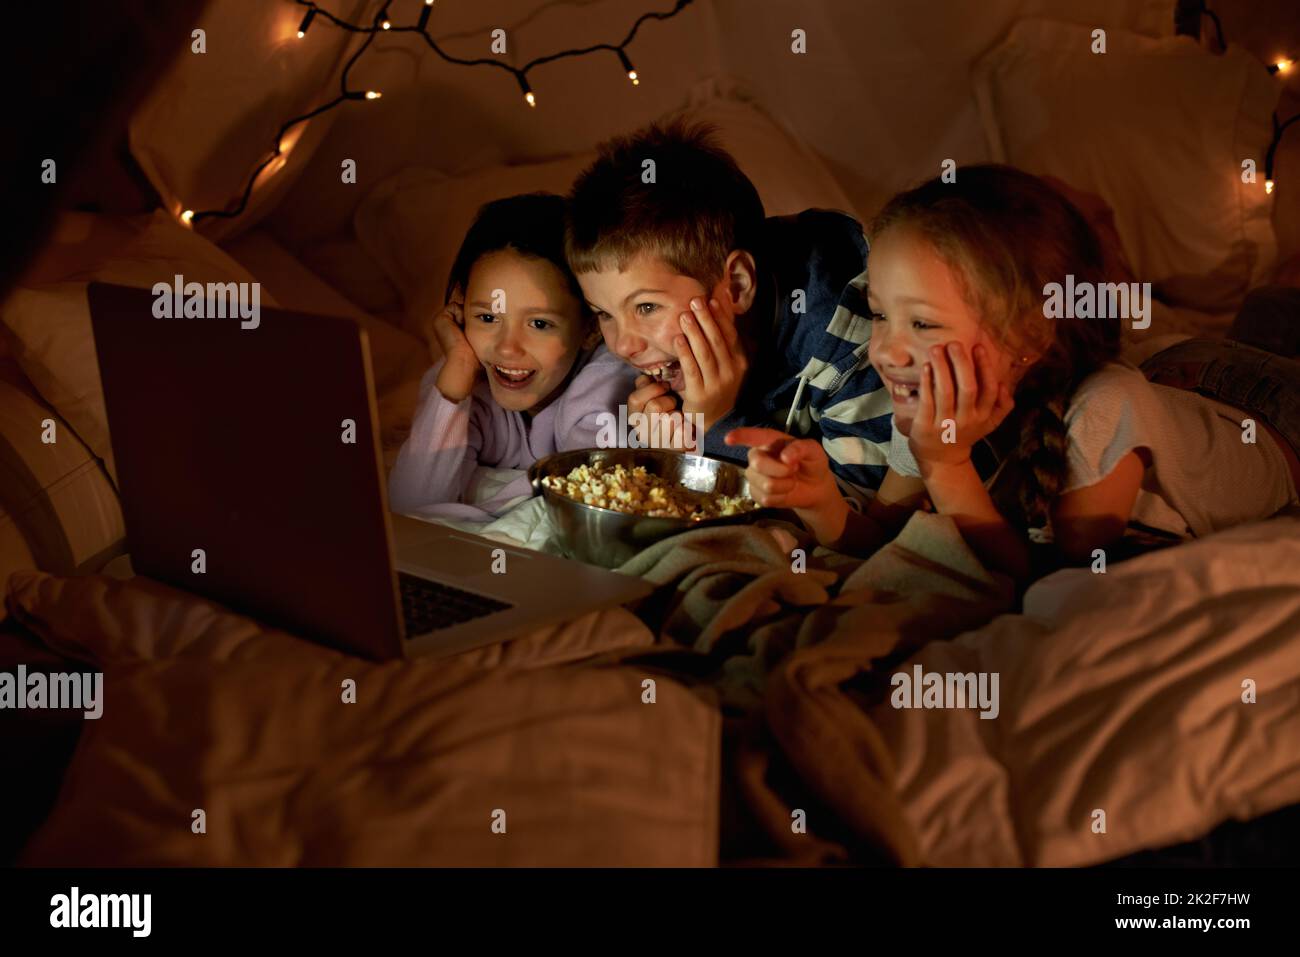 Kids are never far from technology. Shot of three young children using a laptop in a blanket fort. Stock Photo